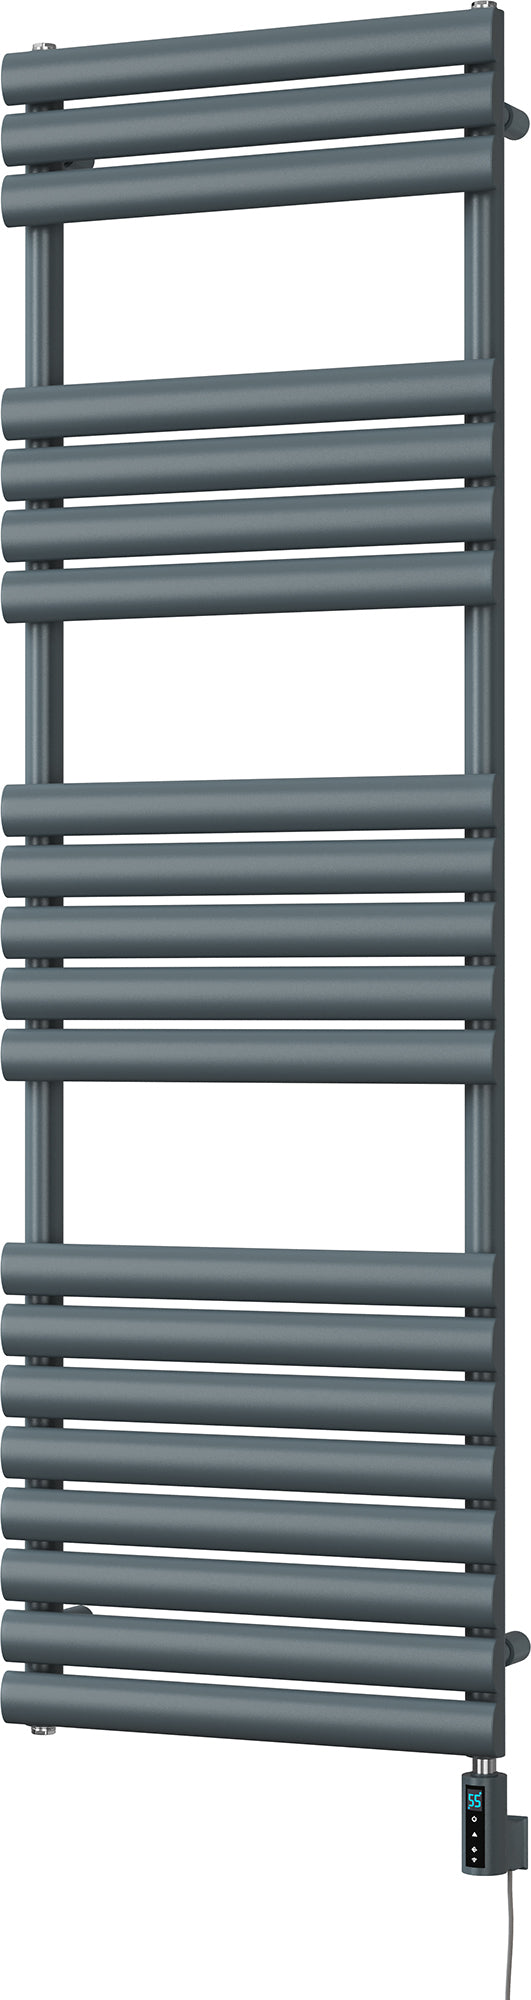 Omeara - Anthracite Electric Towel Rail H1595mm x W500mm 600w Thermostatic WIFI